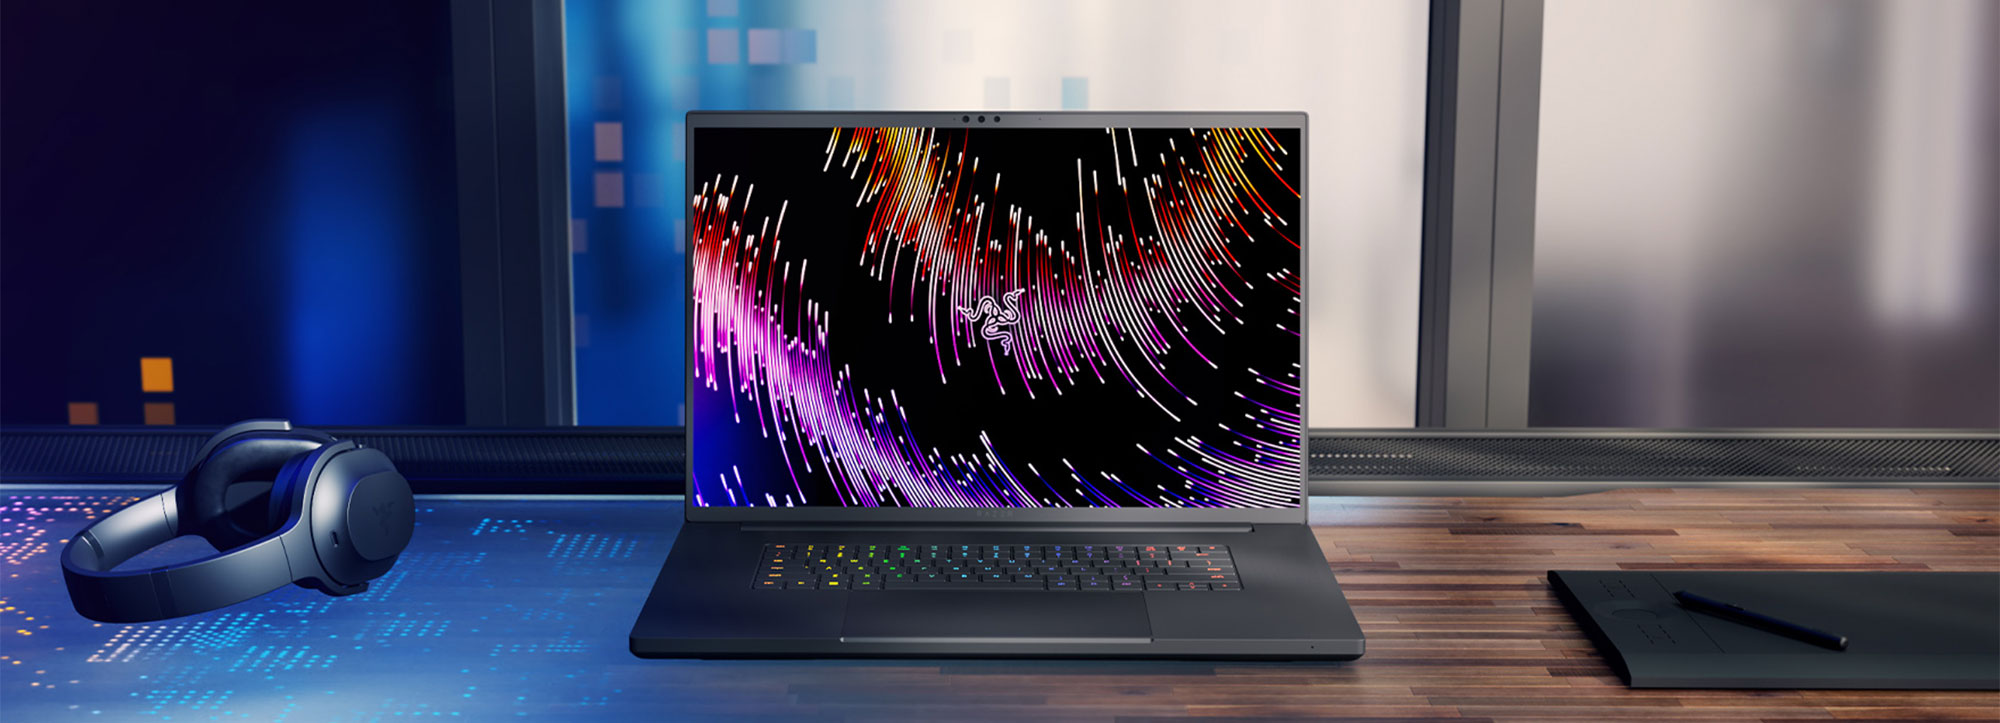 16-Inch Gaming Laptop with Fastest OLED Display